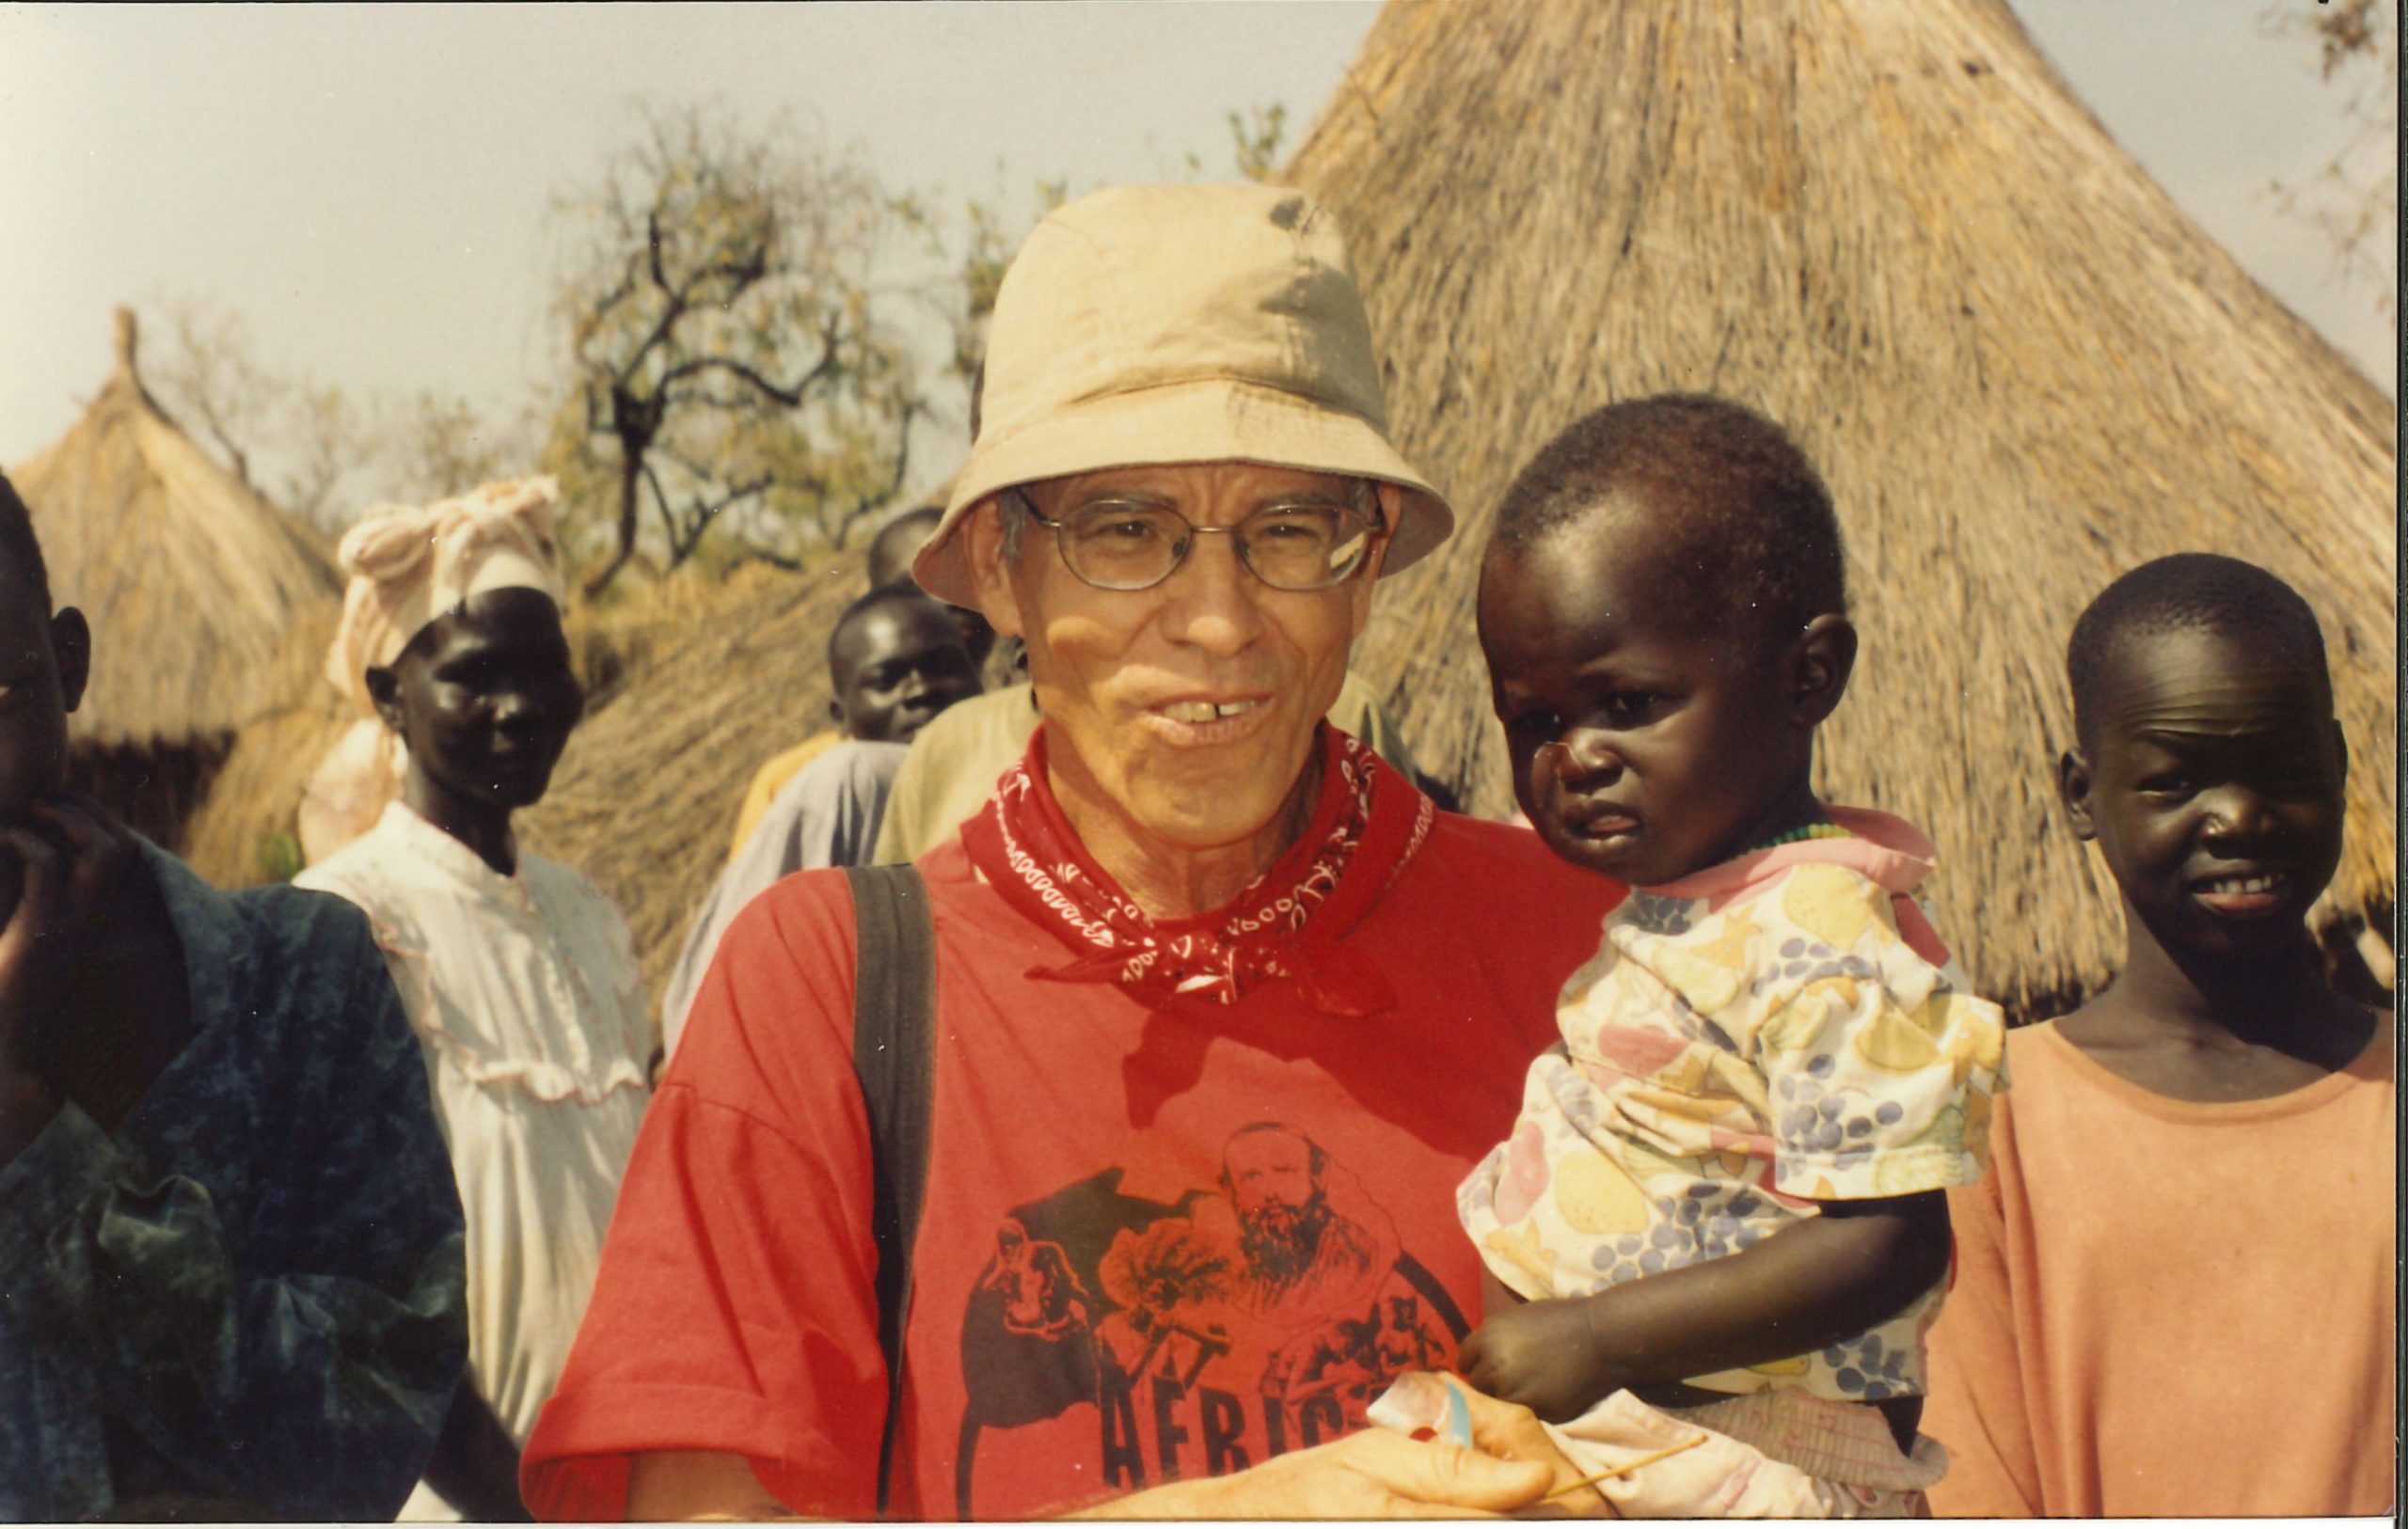 Fr David Baltz, now in his 60s with gray hair, holds a young African child. They stand in front of traditional thatch roof and clay homes. Another African child stands behind them. 